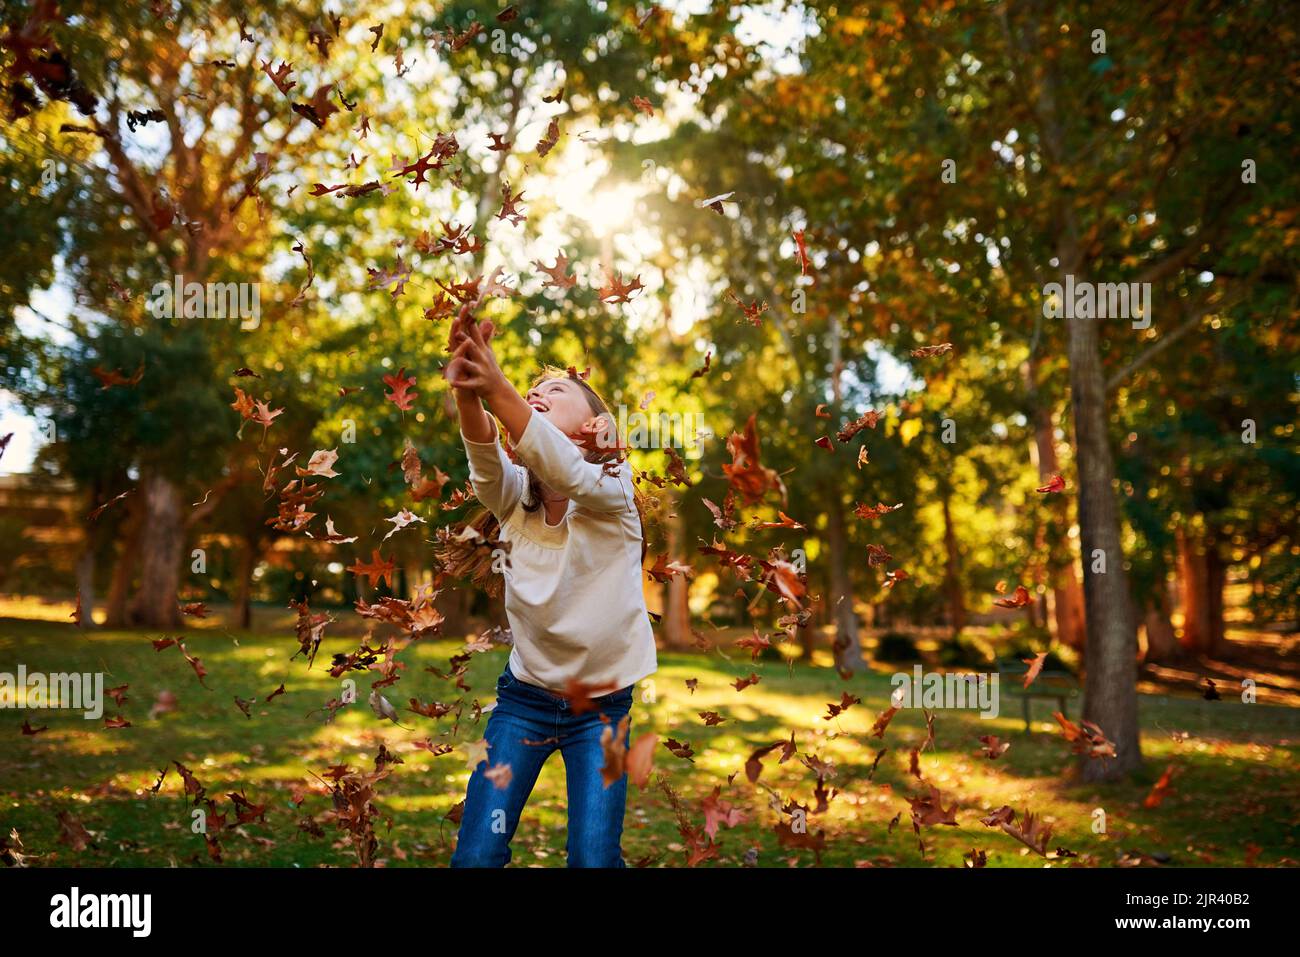 And the leaves came tumbling down. a happy little girl playing in the autumn leaves outdoors. Stock Photo